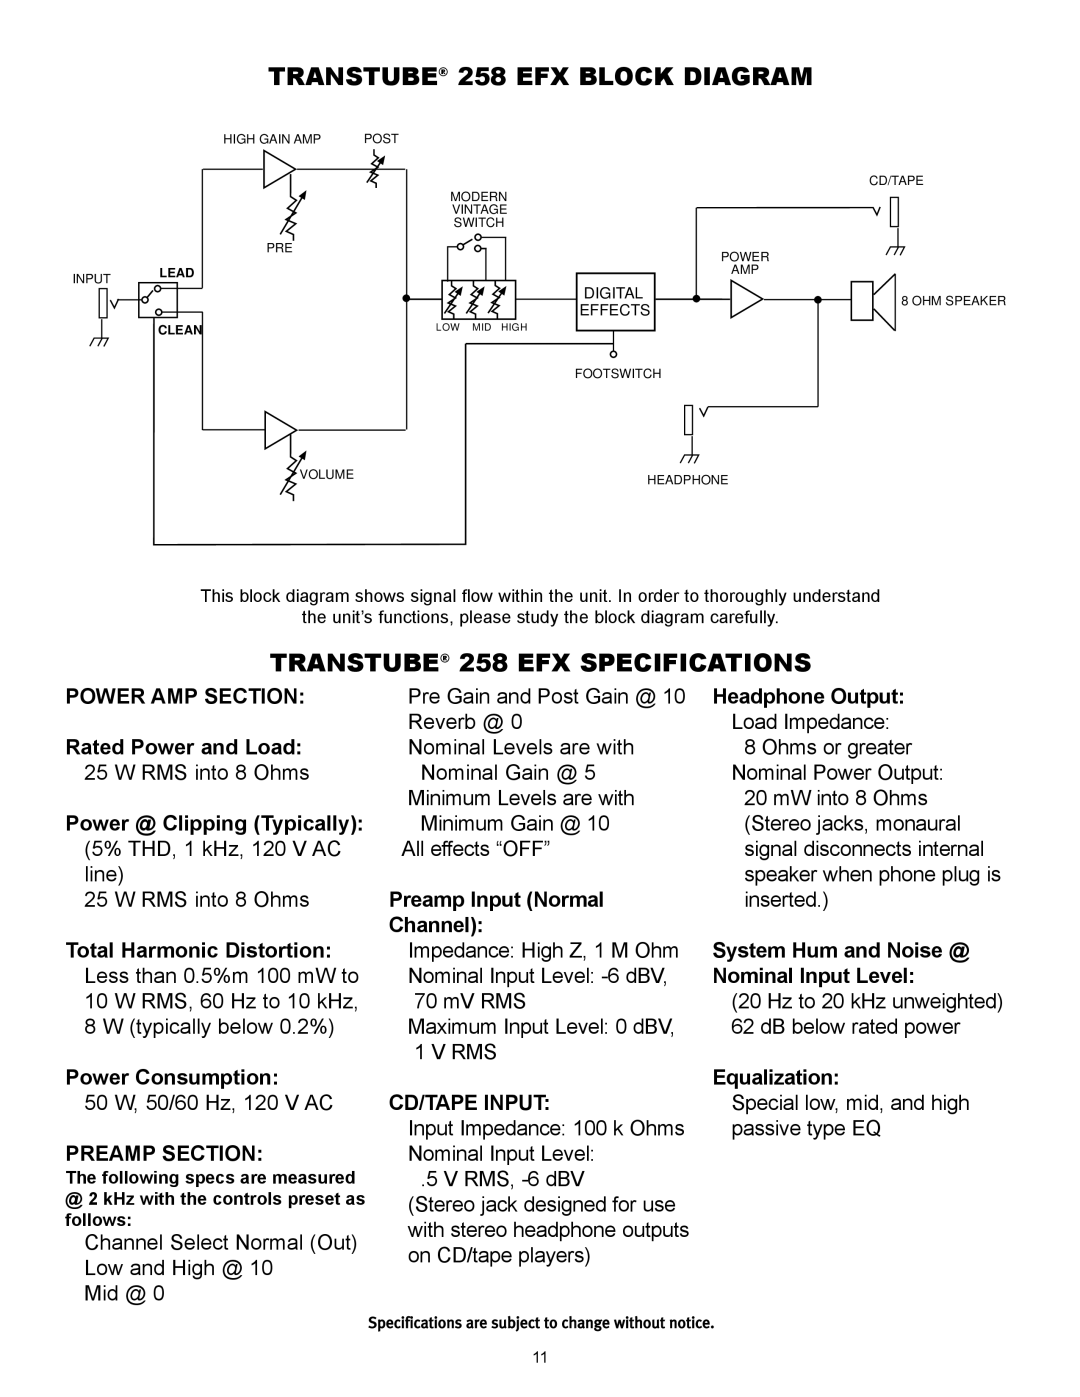 Peavey TRANSTUBE 258 EFX BLOCK DIAGRAM, TRANSTUBE 258 EFX SPECIFICATIONS, POWER AMP SECTION Rated Power and Load 